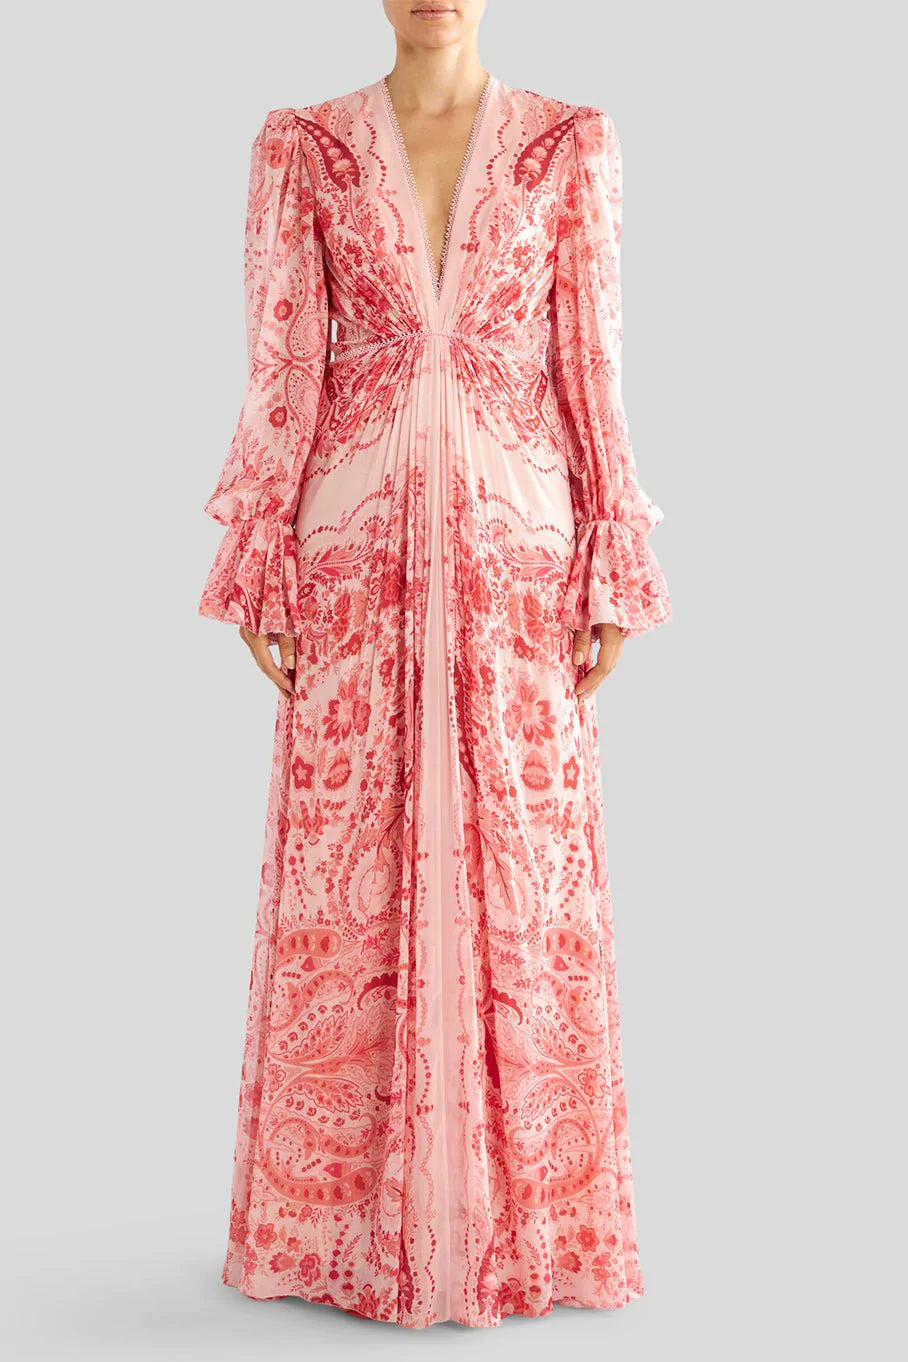 ETRO-Long Sleeve Deep V-Neck Gown-